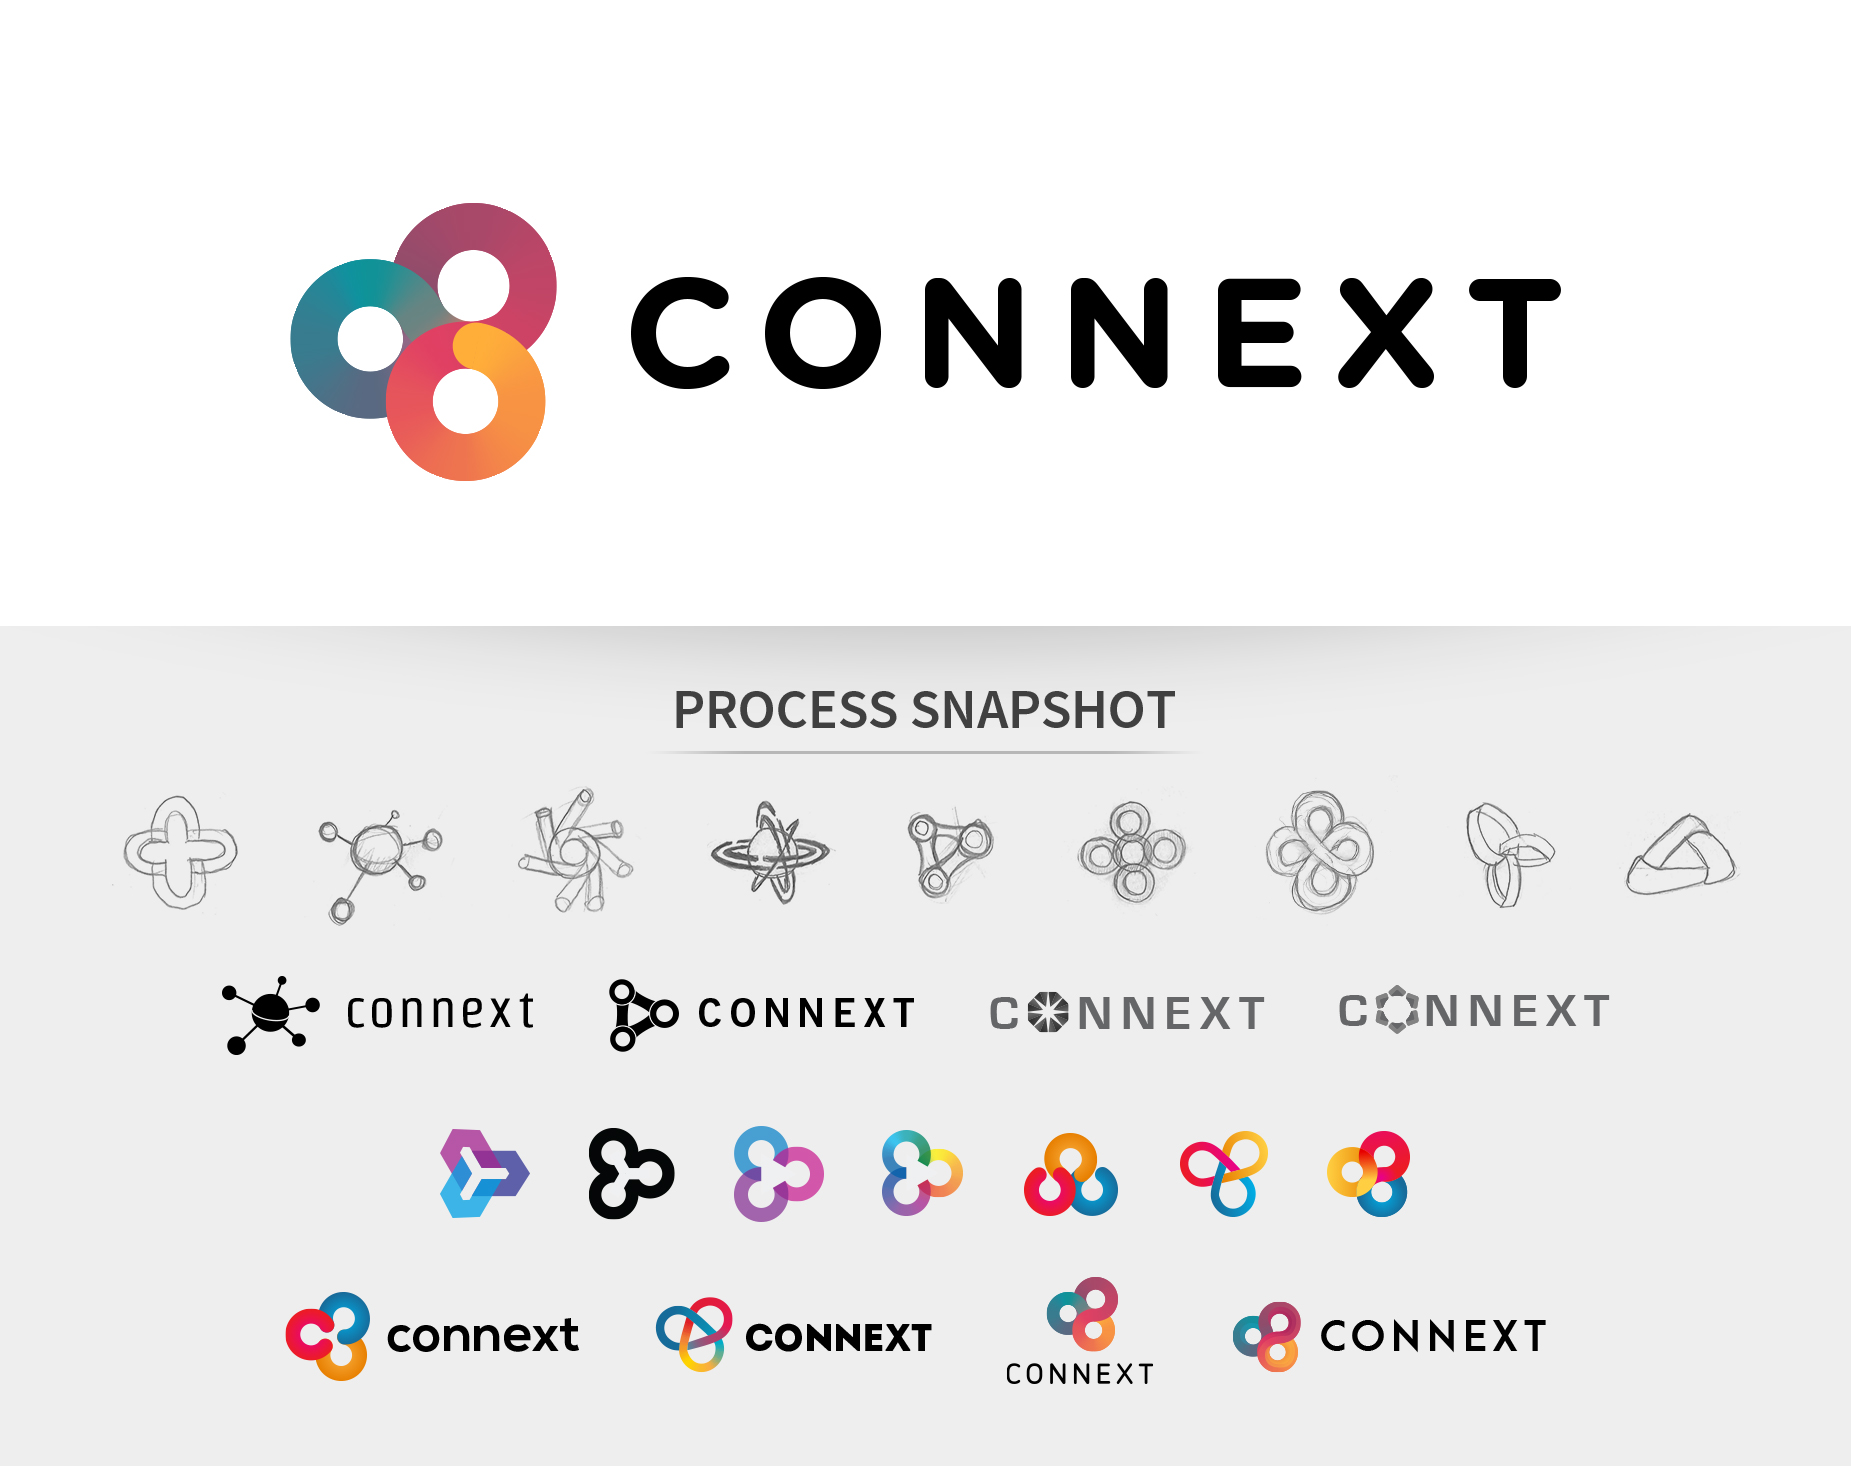 Connext logo branding and process snapshot